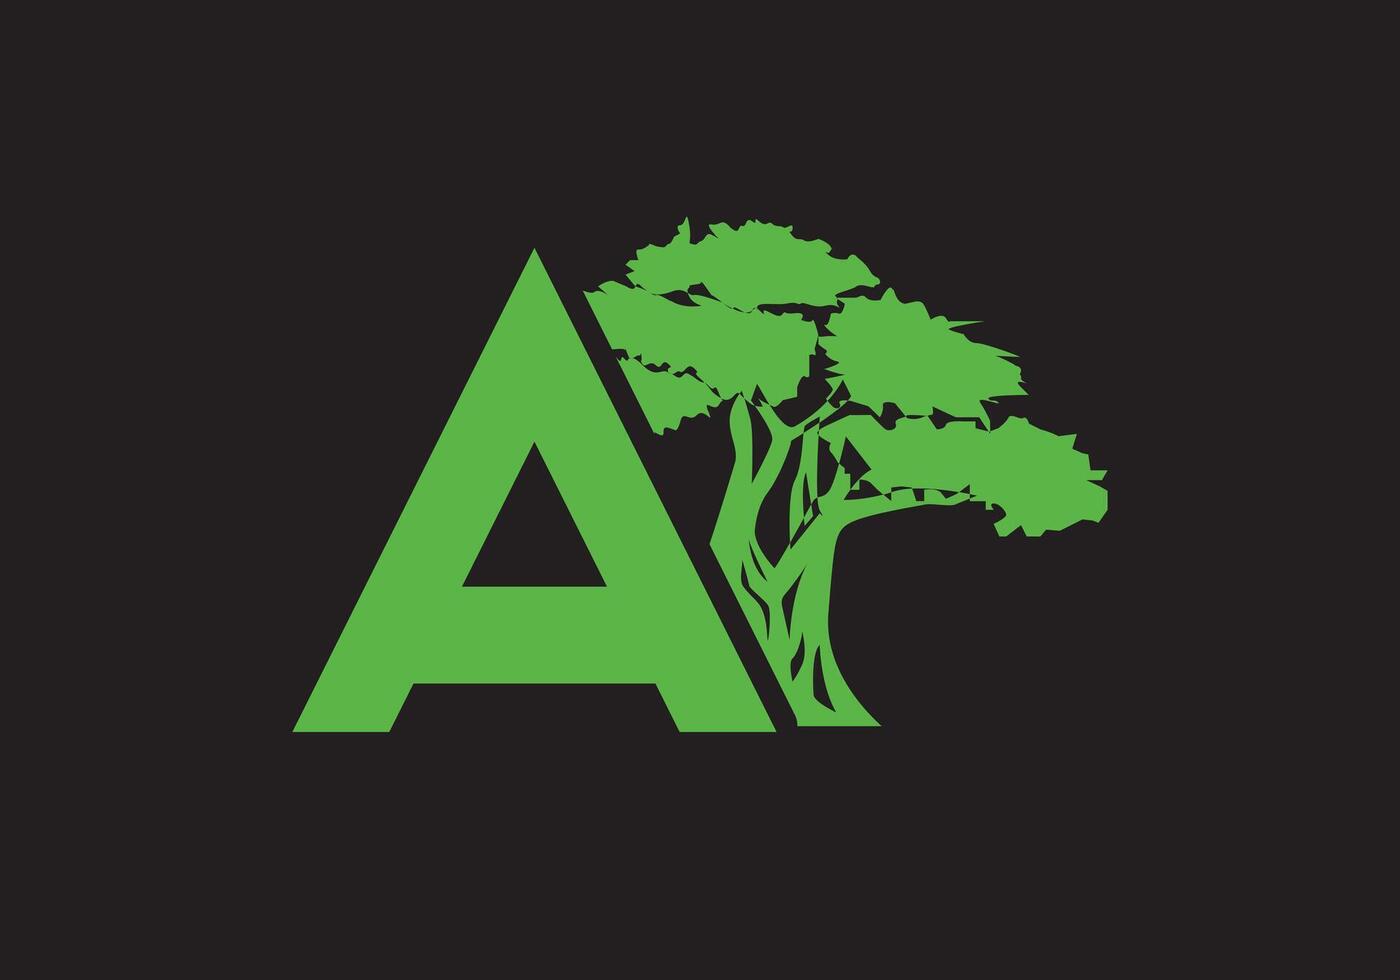 Letter A Tree Logo ,Tree logos, Lettering, Typographic logo, tree and A logo, leaf and alphabet logo. vector